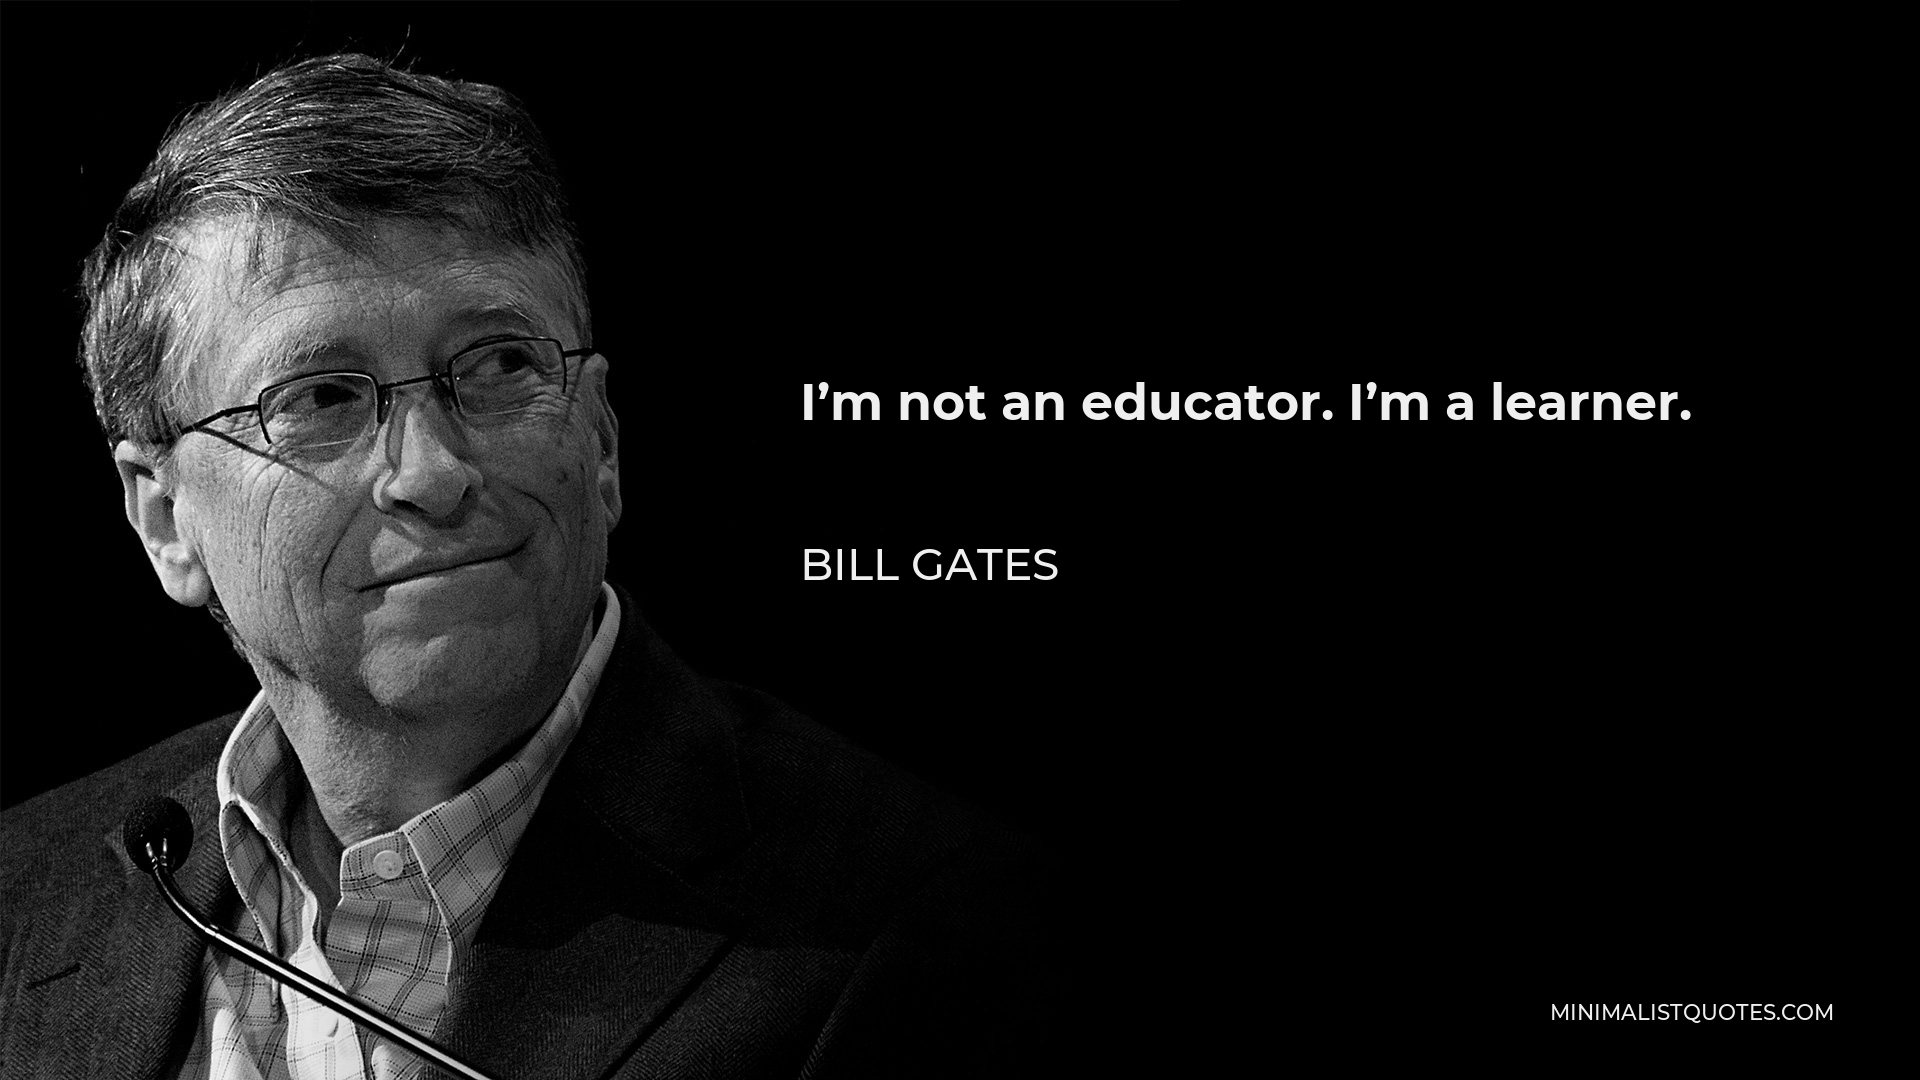 Bill Gates Quote - I’m not an educator. I’m a learner.